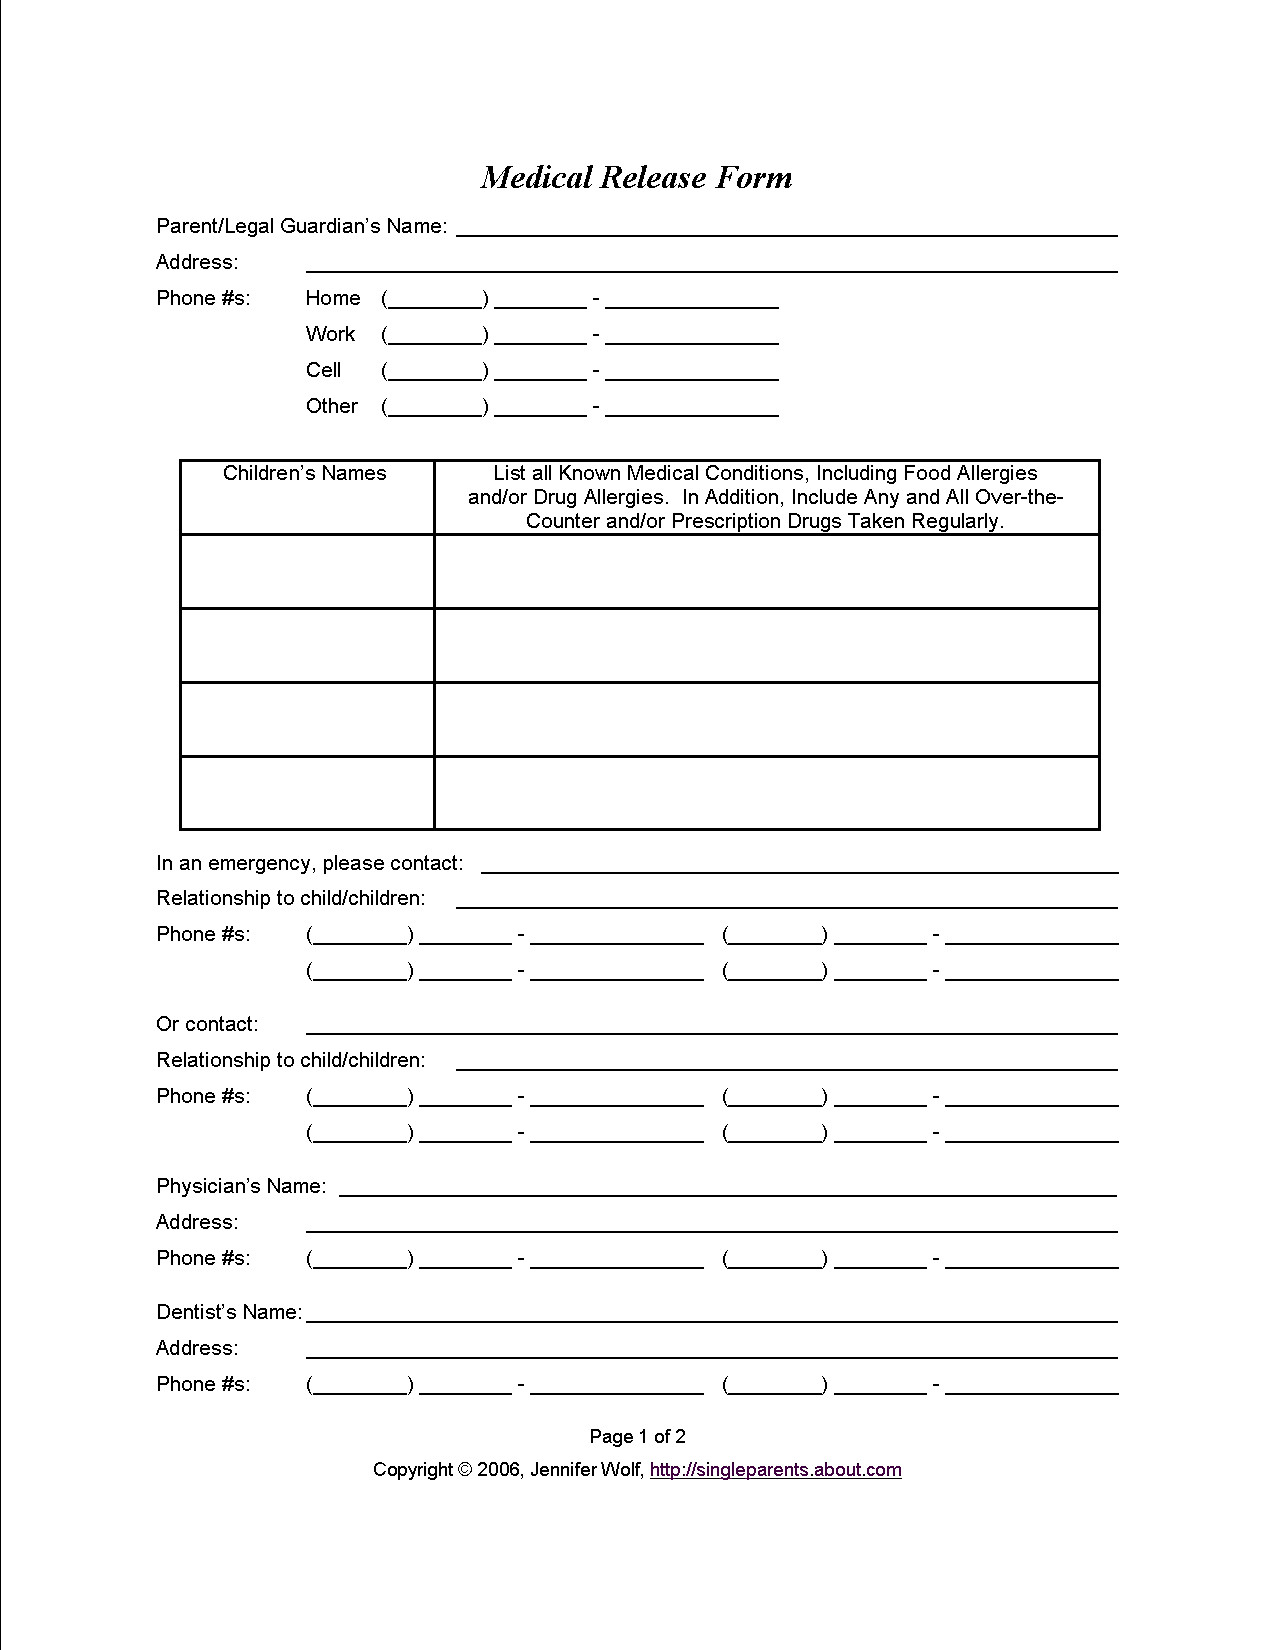 Free Medical Release form Medical Consent form when You Might Need E